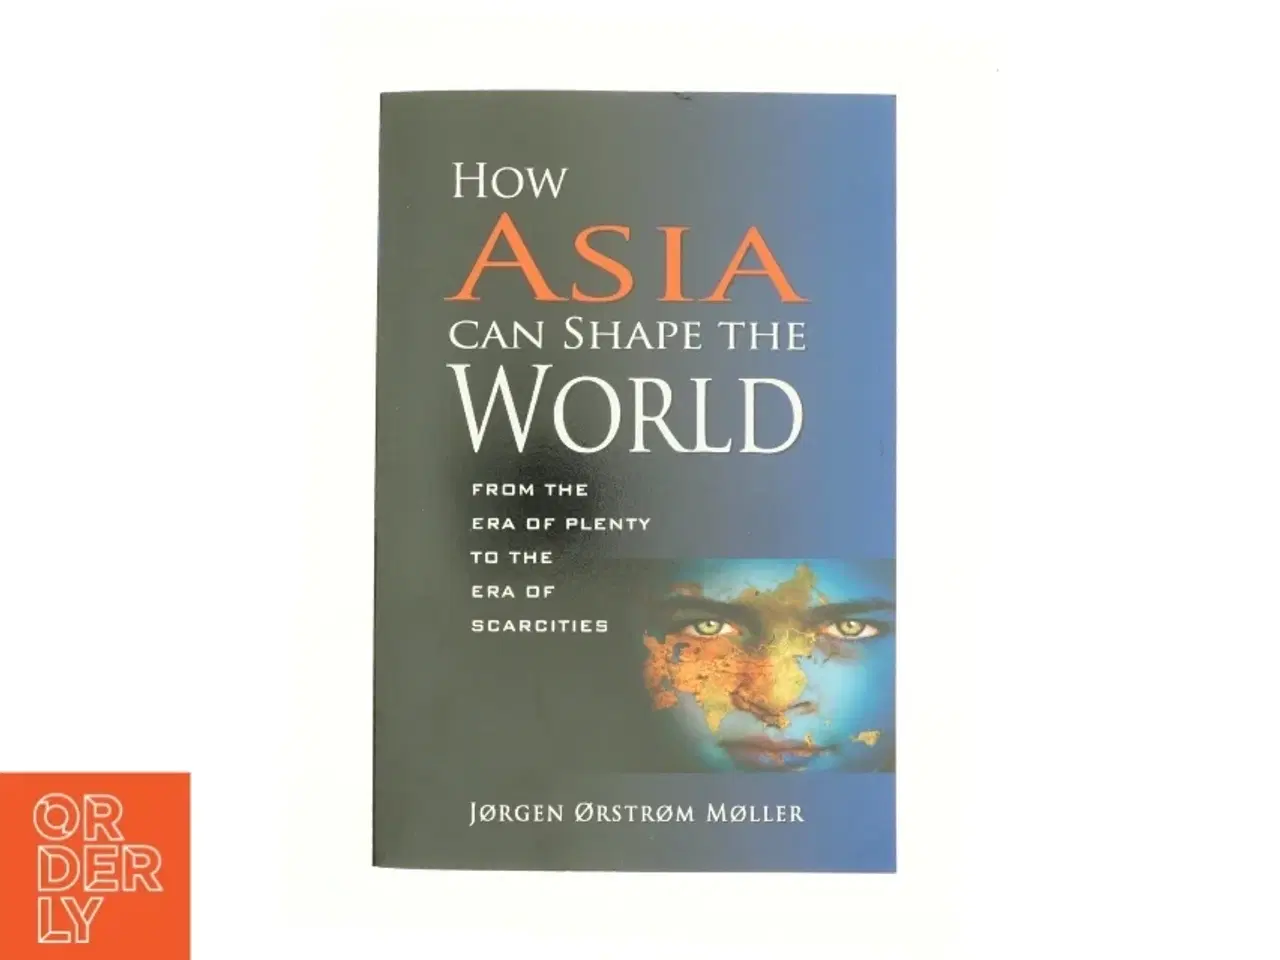 Billede 1 - How Asia Can Shape the World : from the Era of Plenty to the Era of Scarcities af Orstrom Jorgen Moller (Bog)